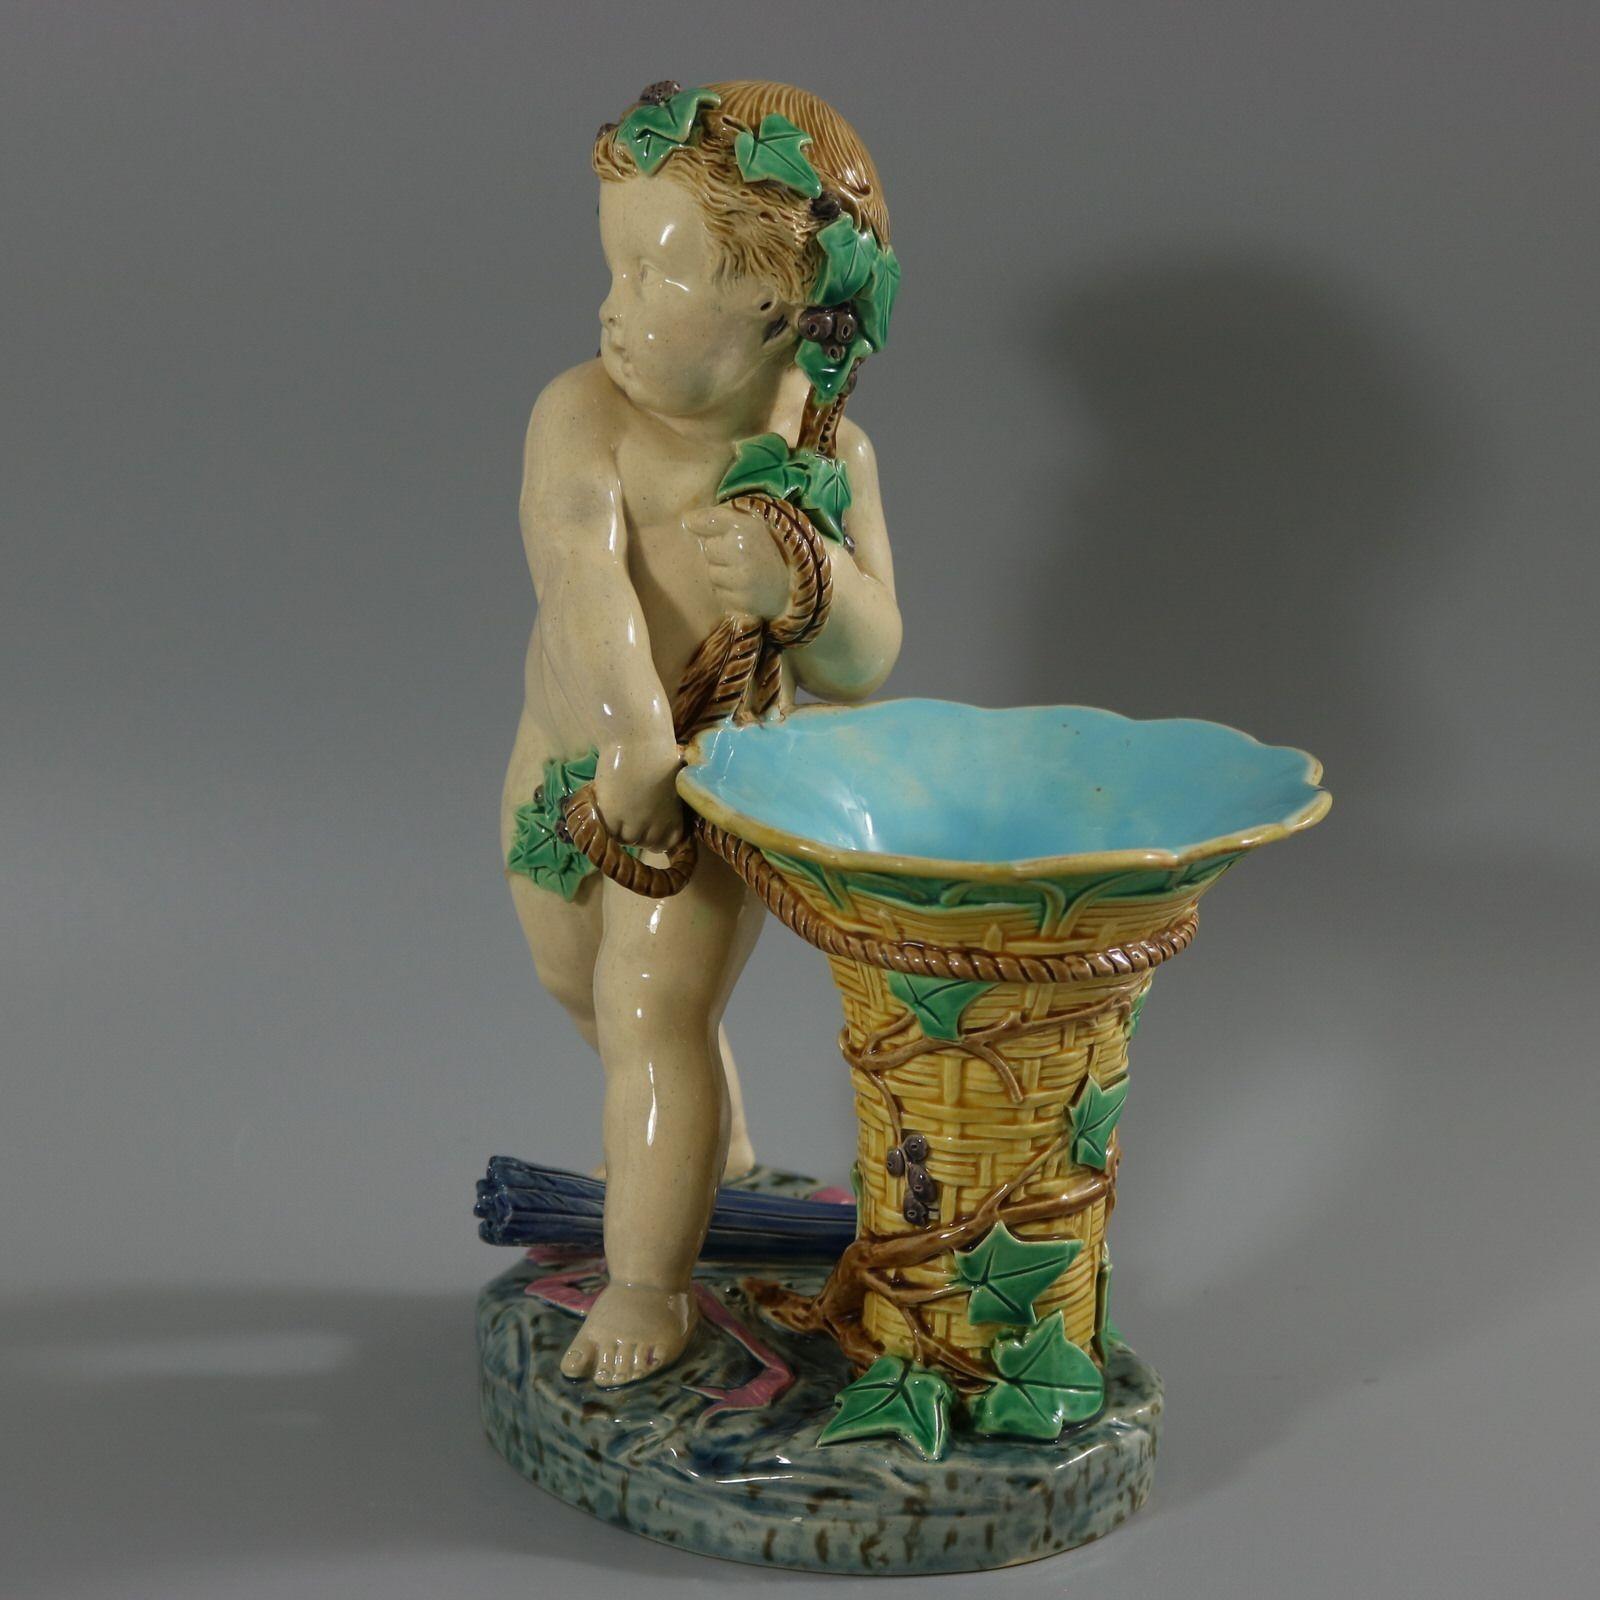 Minton Majolica figural vase which features a putti holding a basket, with a quiver of arrows between his feet. Colouration: cream, yellow, blue, are predominant. The piece bears maker's marks for the Minton pottery. Bears a pattern number, '405'.